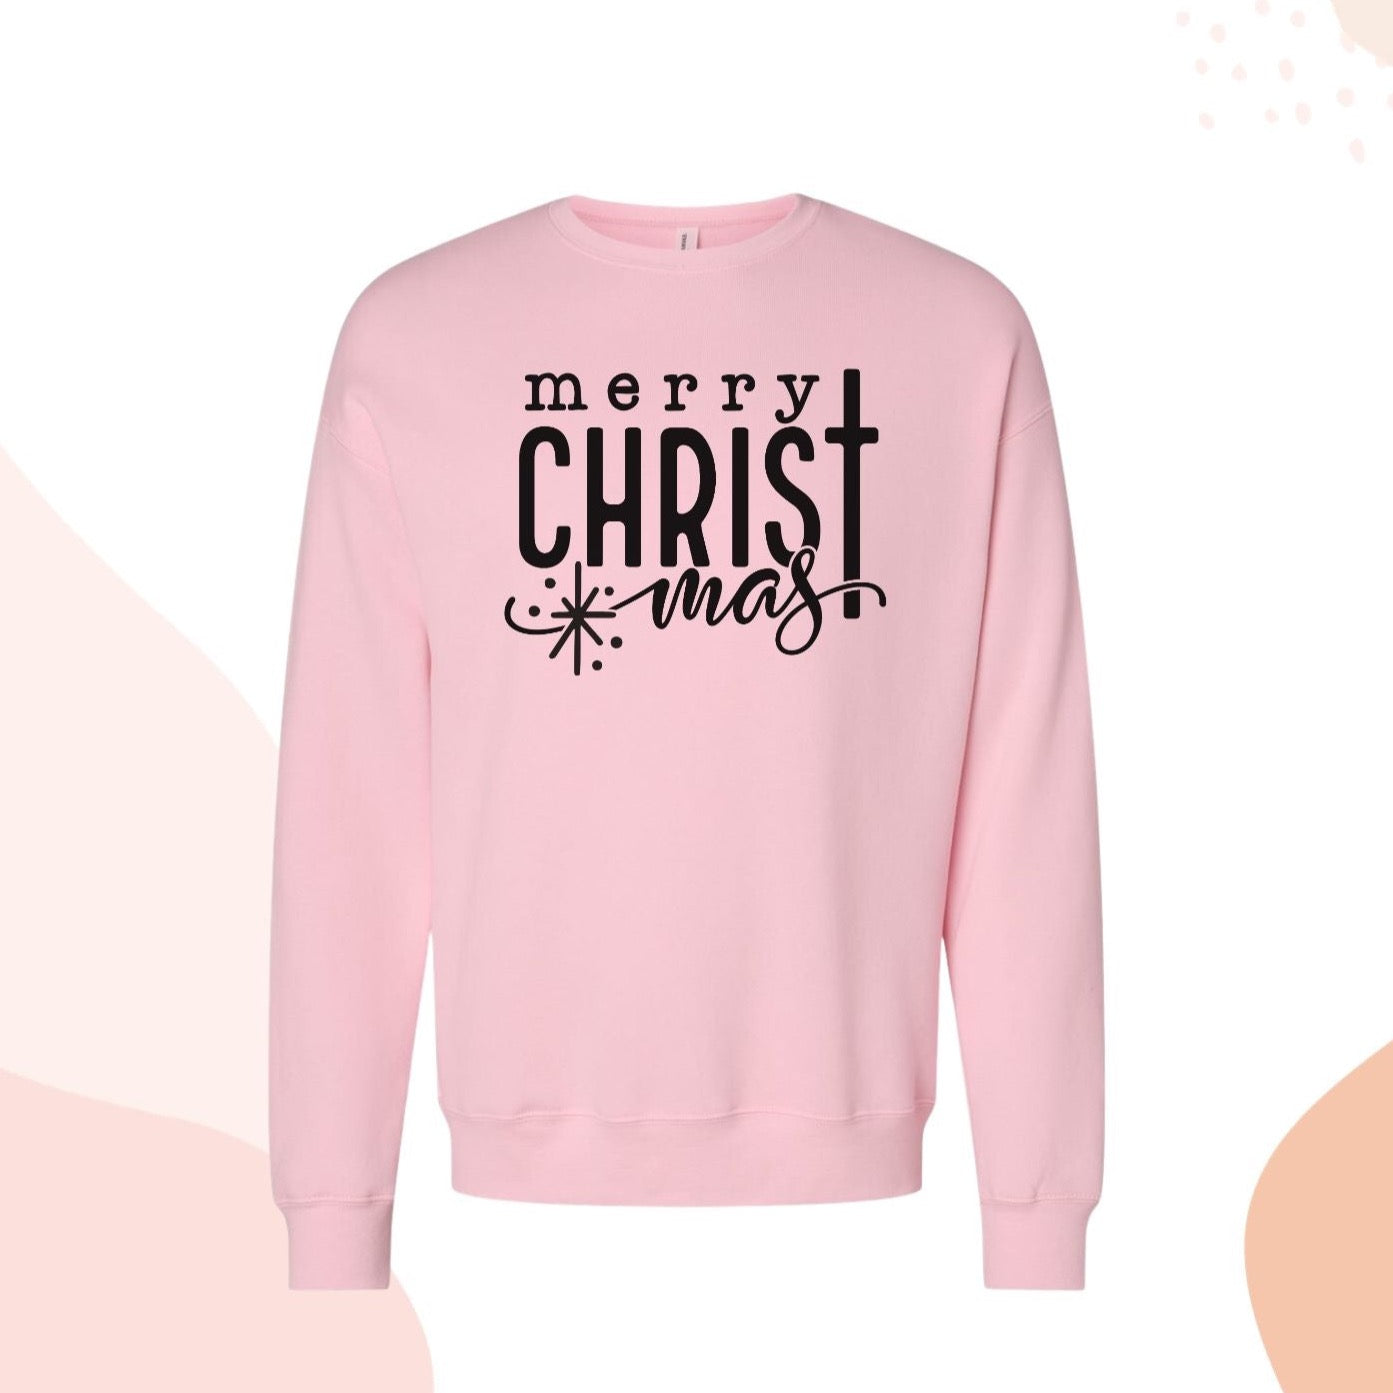 Pink Merry CHRISTmas Sweatshirt for Her, Cute Shirt for Christmas Pink, Christian Christmas Sweater, Religious Christmas Crewneck Shirt  for Women Pink